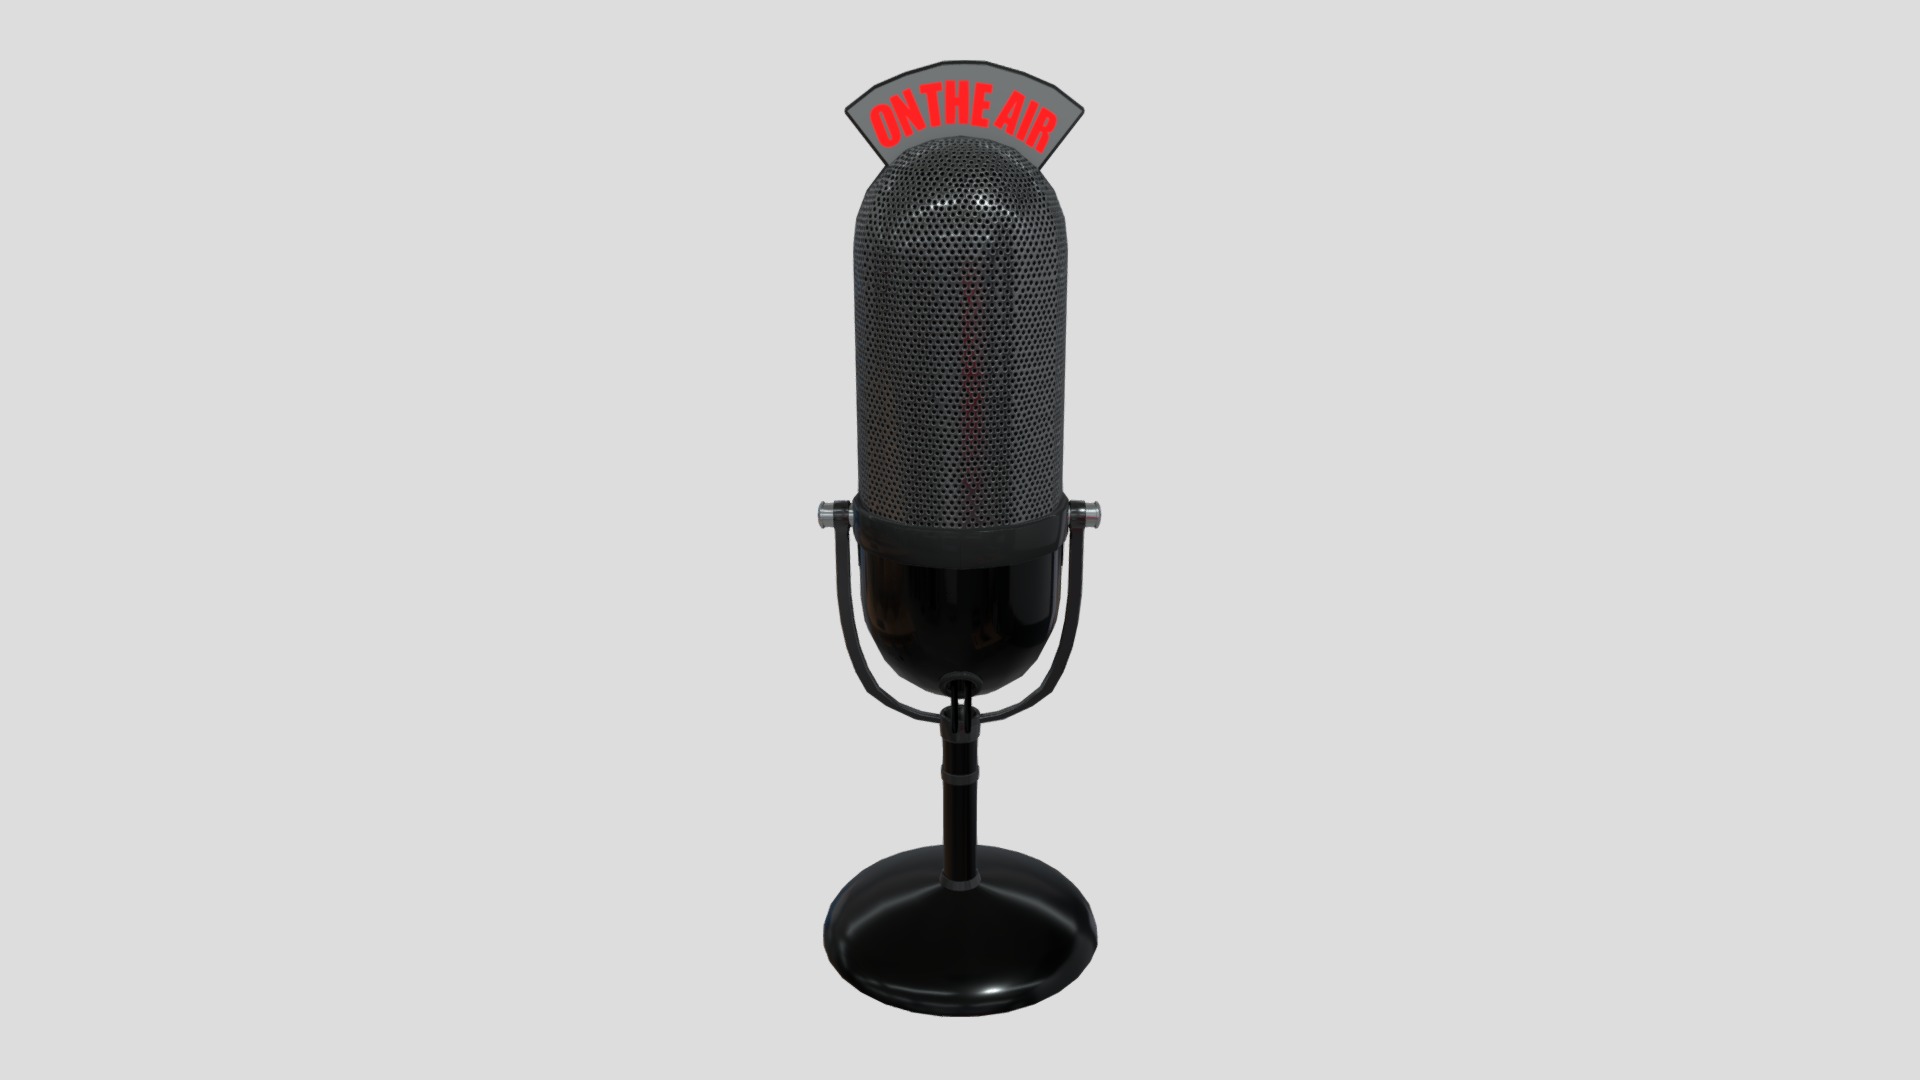 3D model Vintage Microphone - This is a 3D model of the Vintage Microphone. The 3D model is about a black and red microphone.